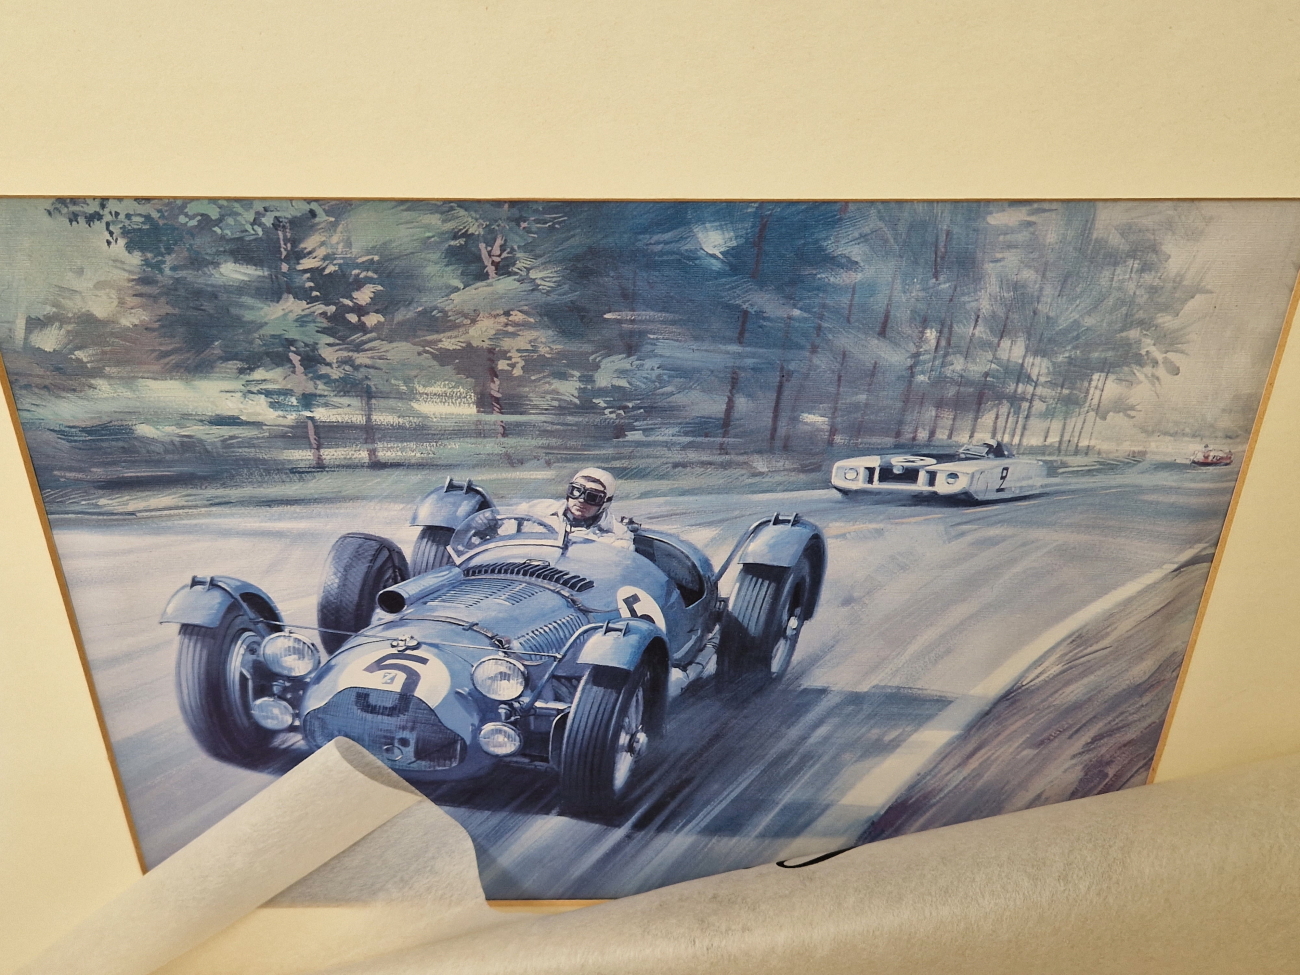 A GROUP OF AUTO RELATED VINTAGE COLOUR PRINTS, SOME PENCIL SIGNED BY WALTER GOTSCHKE. SIZES VARY - Image 2 of 6